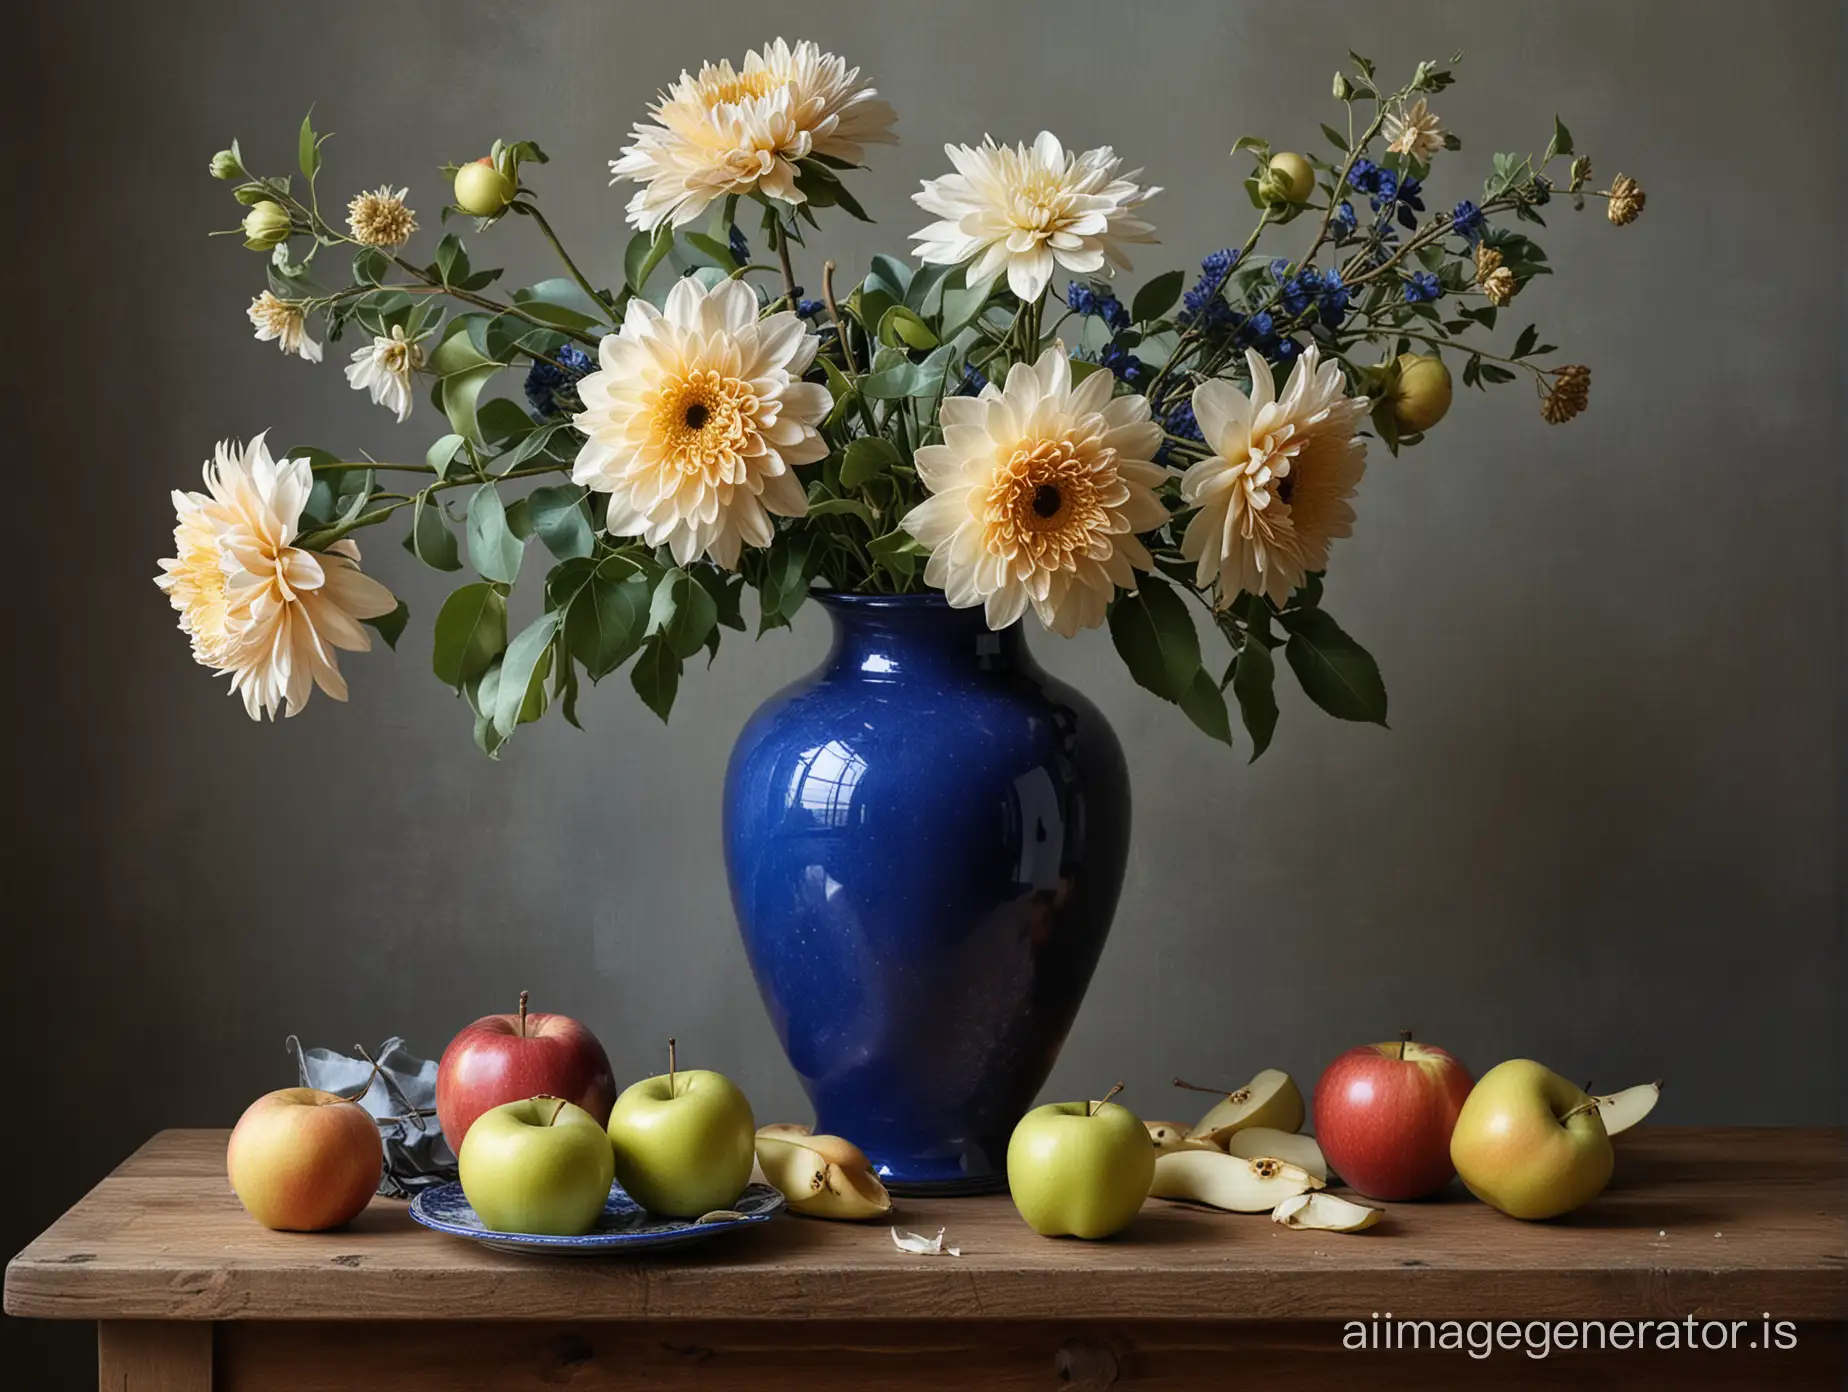 Still life with three large flowers in a cobalt vase, next to apples and pears